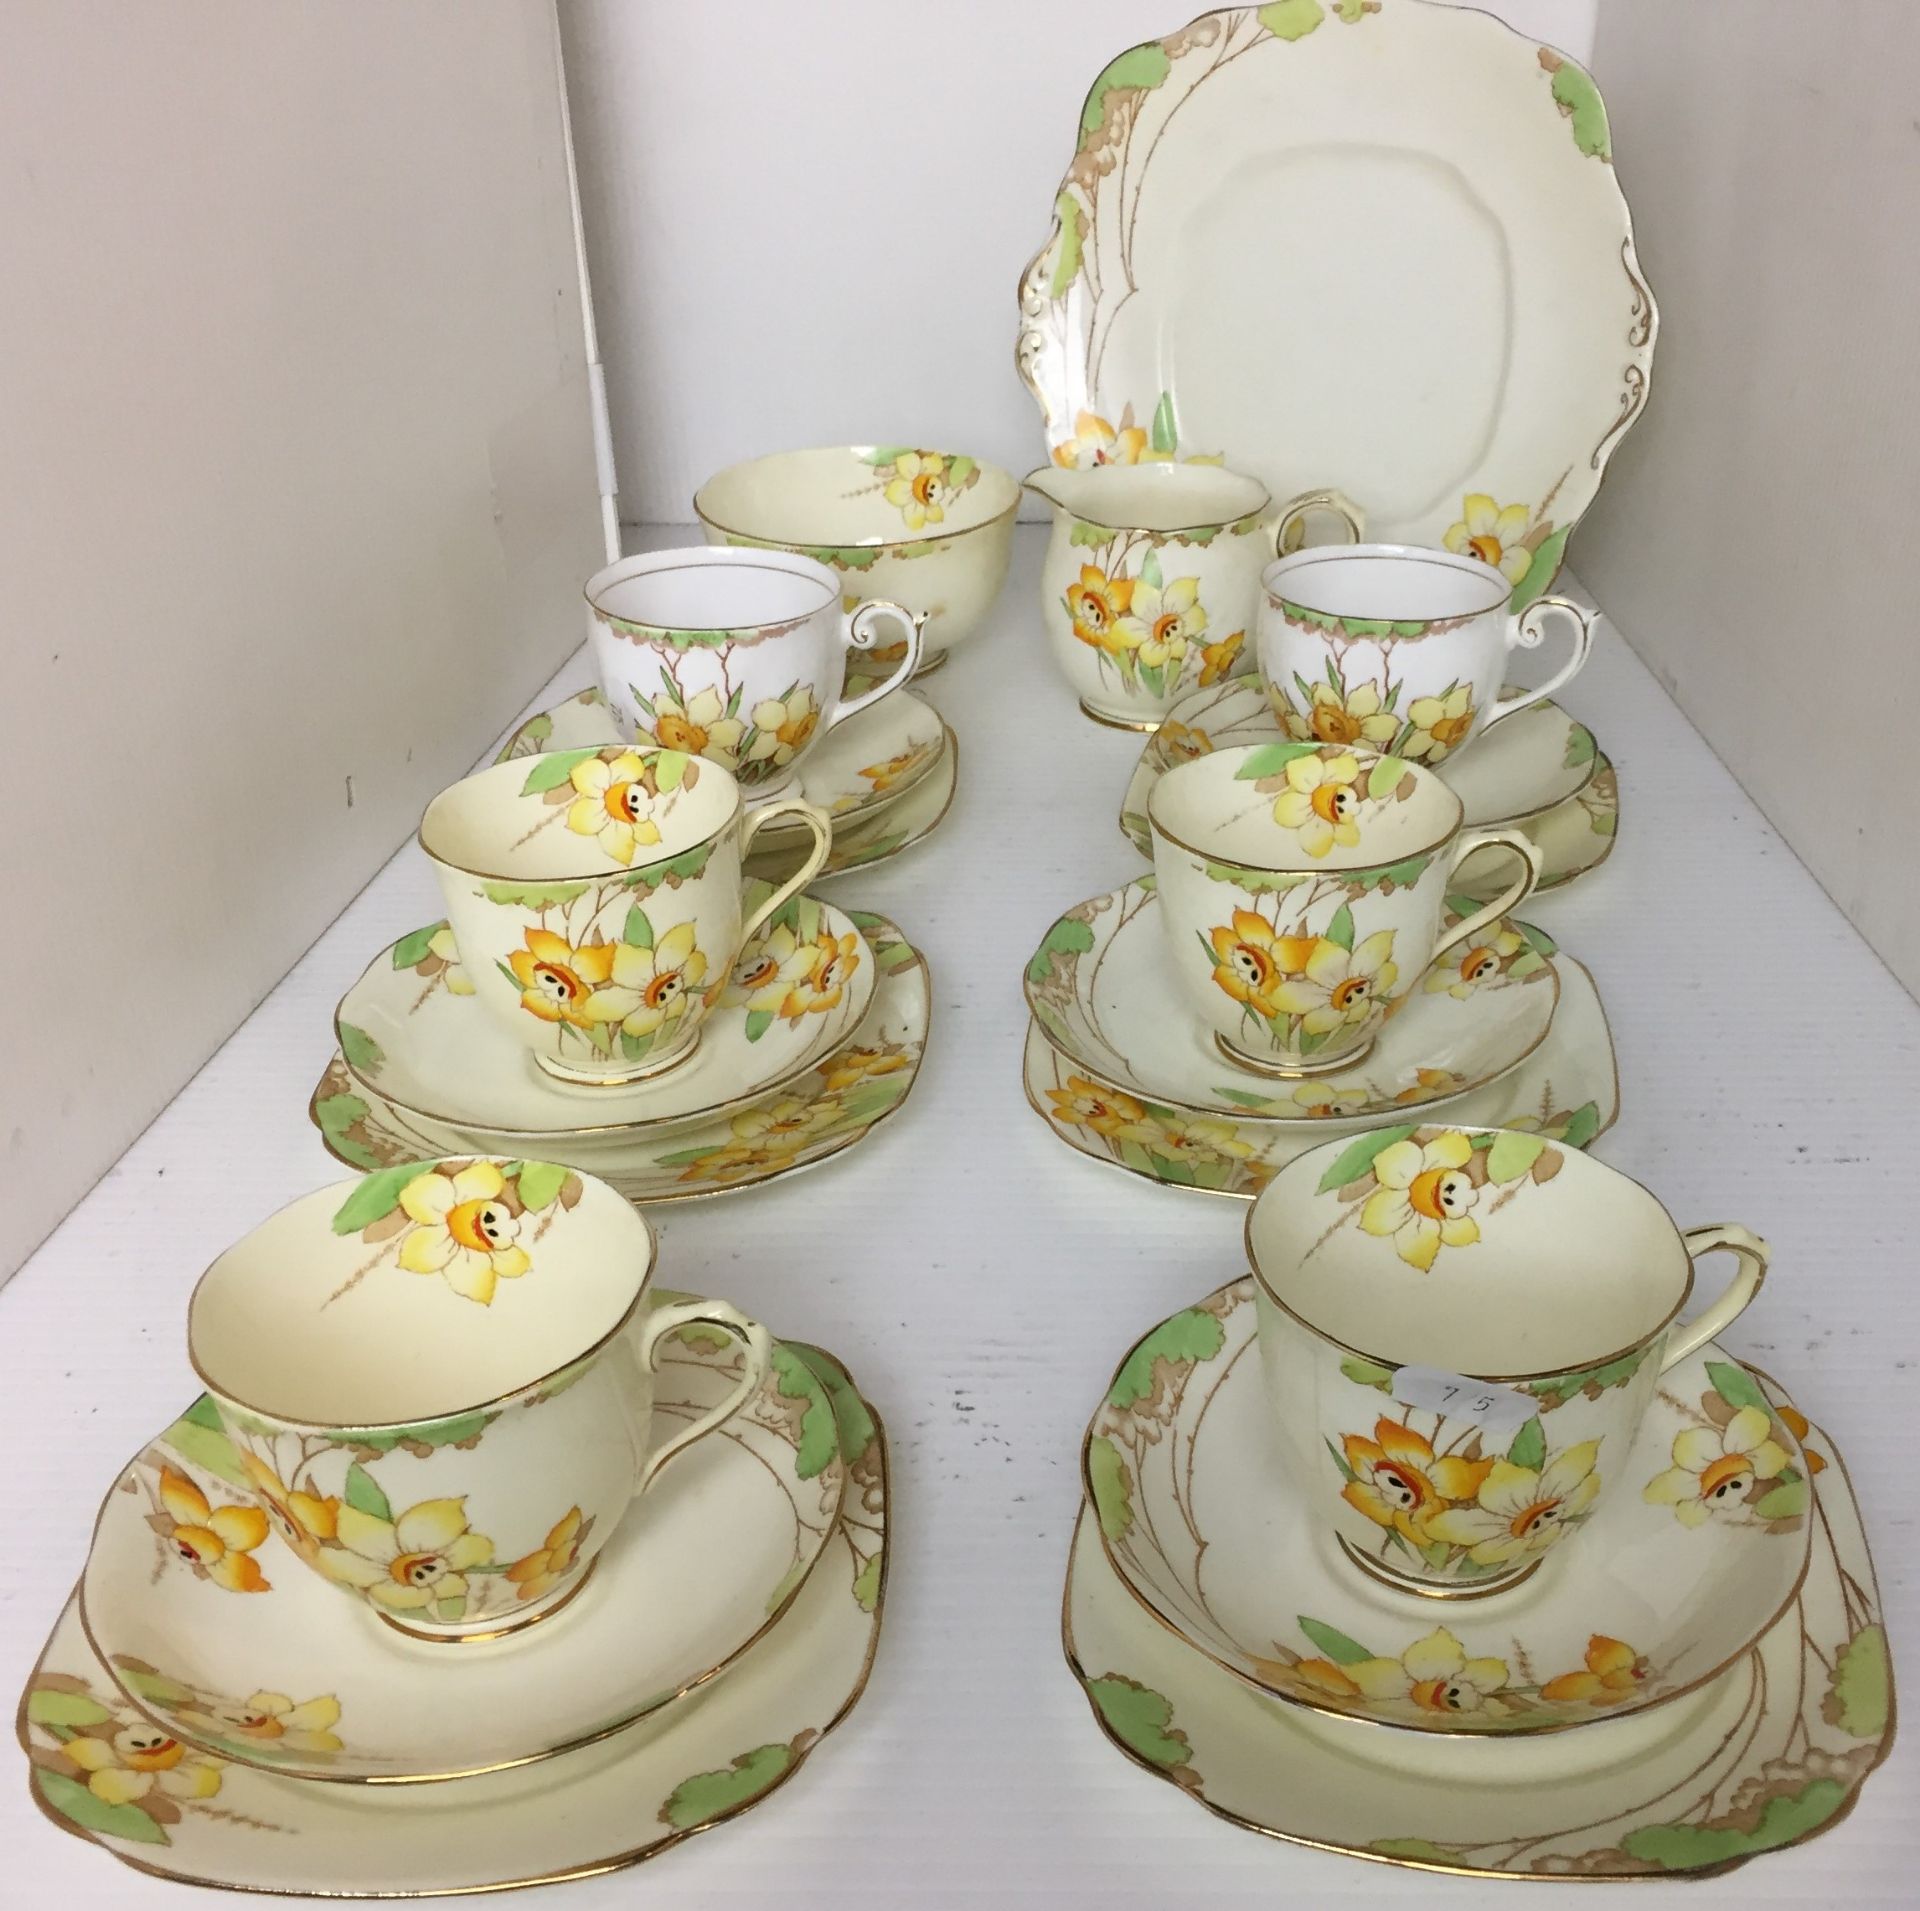 Twenty one pieces including nineteen Royal Albert Daffodil tea set (one cup cracked) and two white